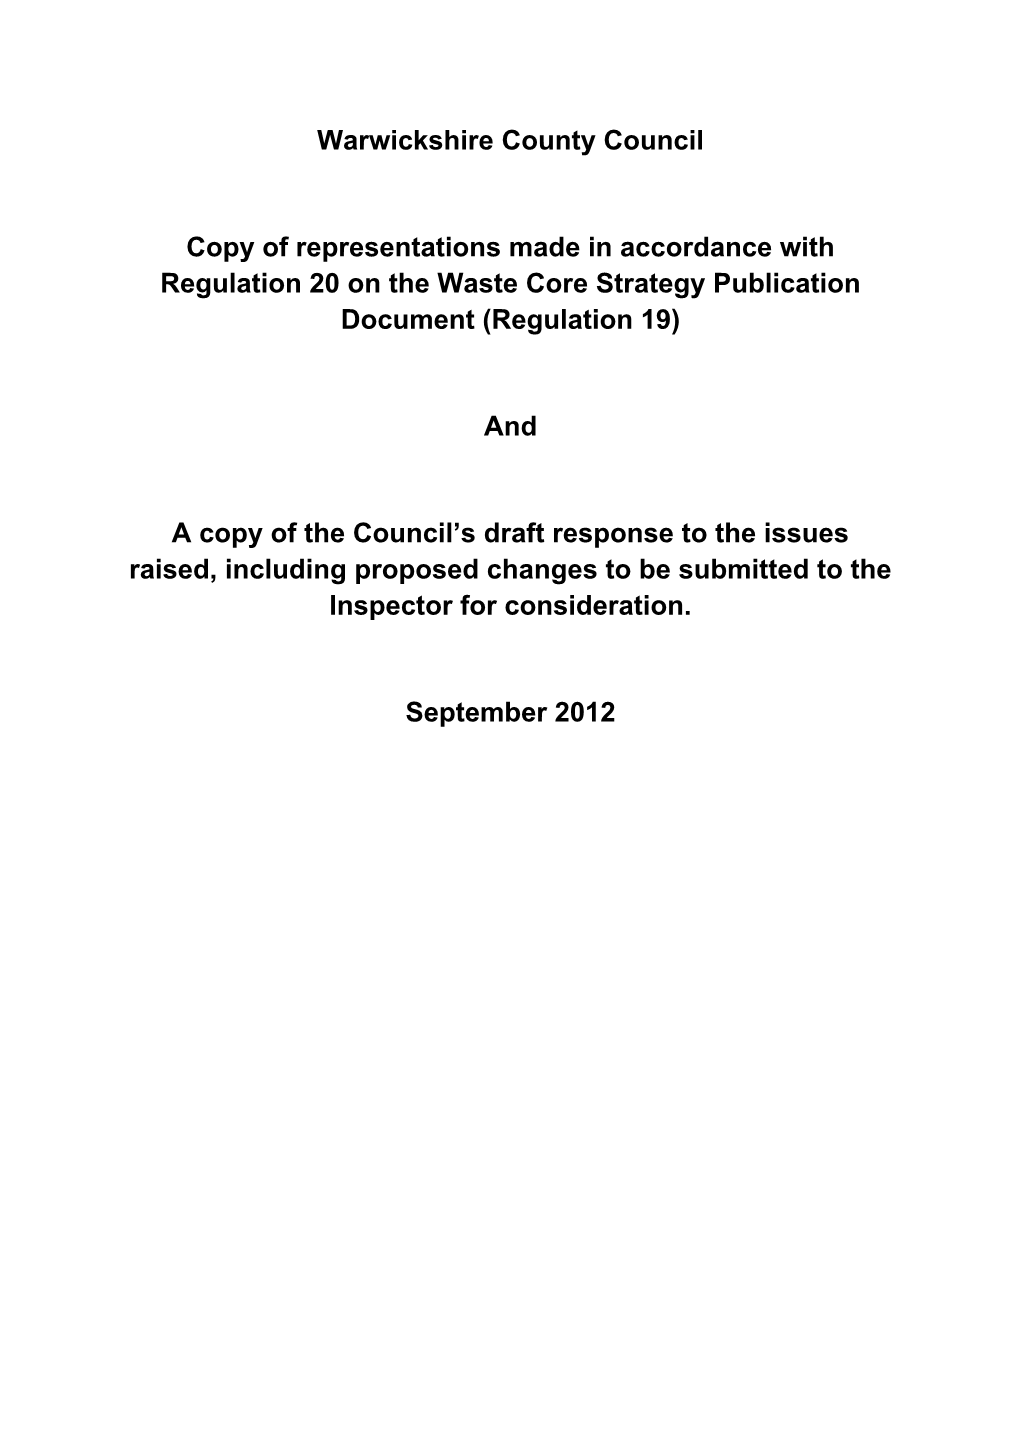 Warwickshire County Council Copy of Representations Made In